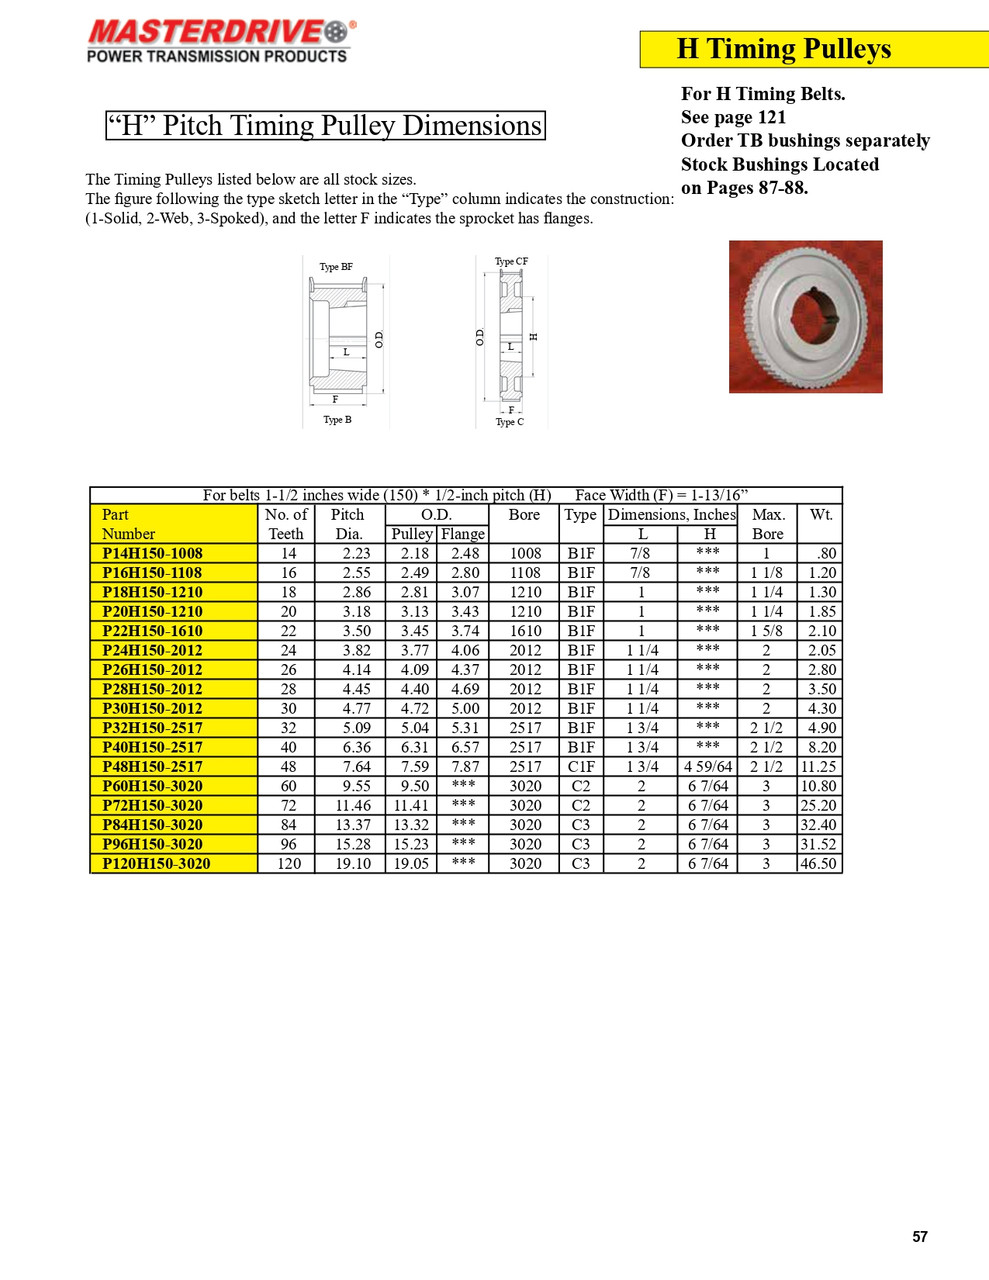 28 Tooth "H" Pitch "TB" Timing Pulley  P28H150-2012